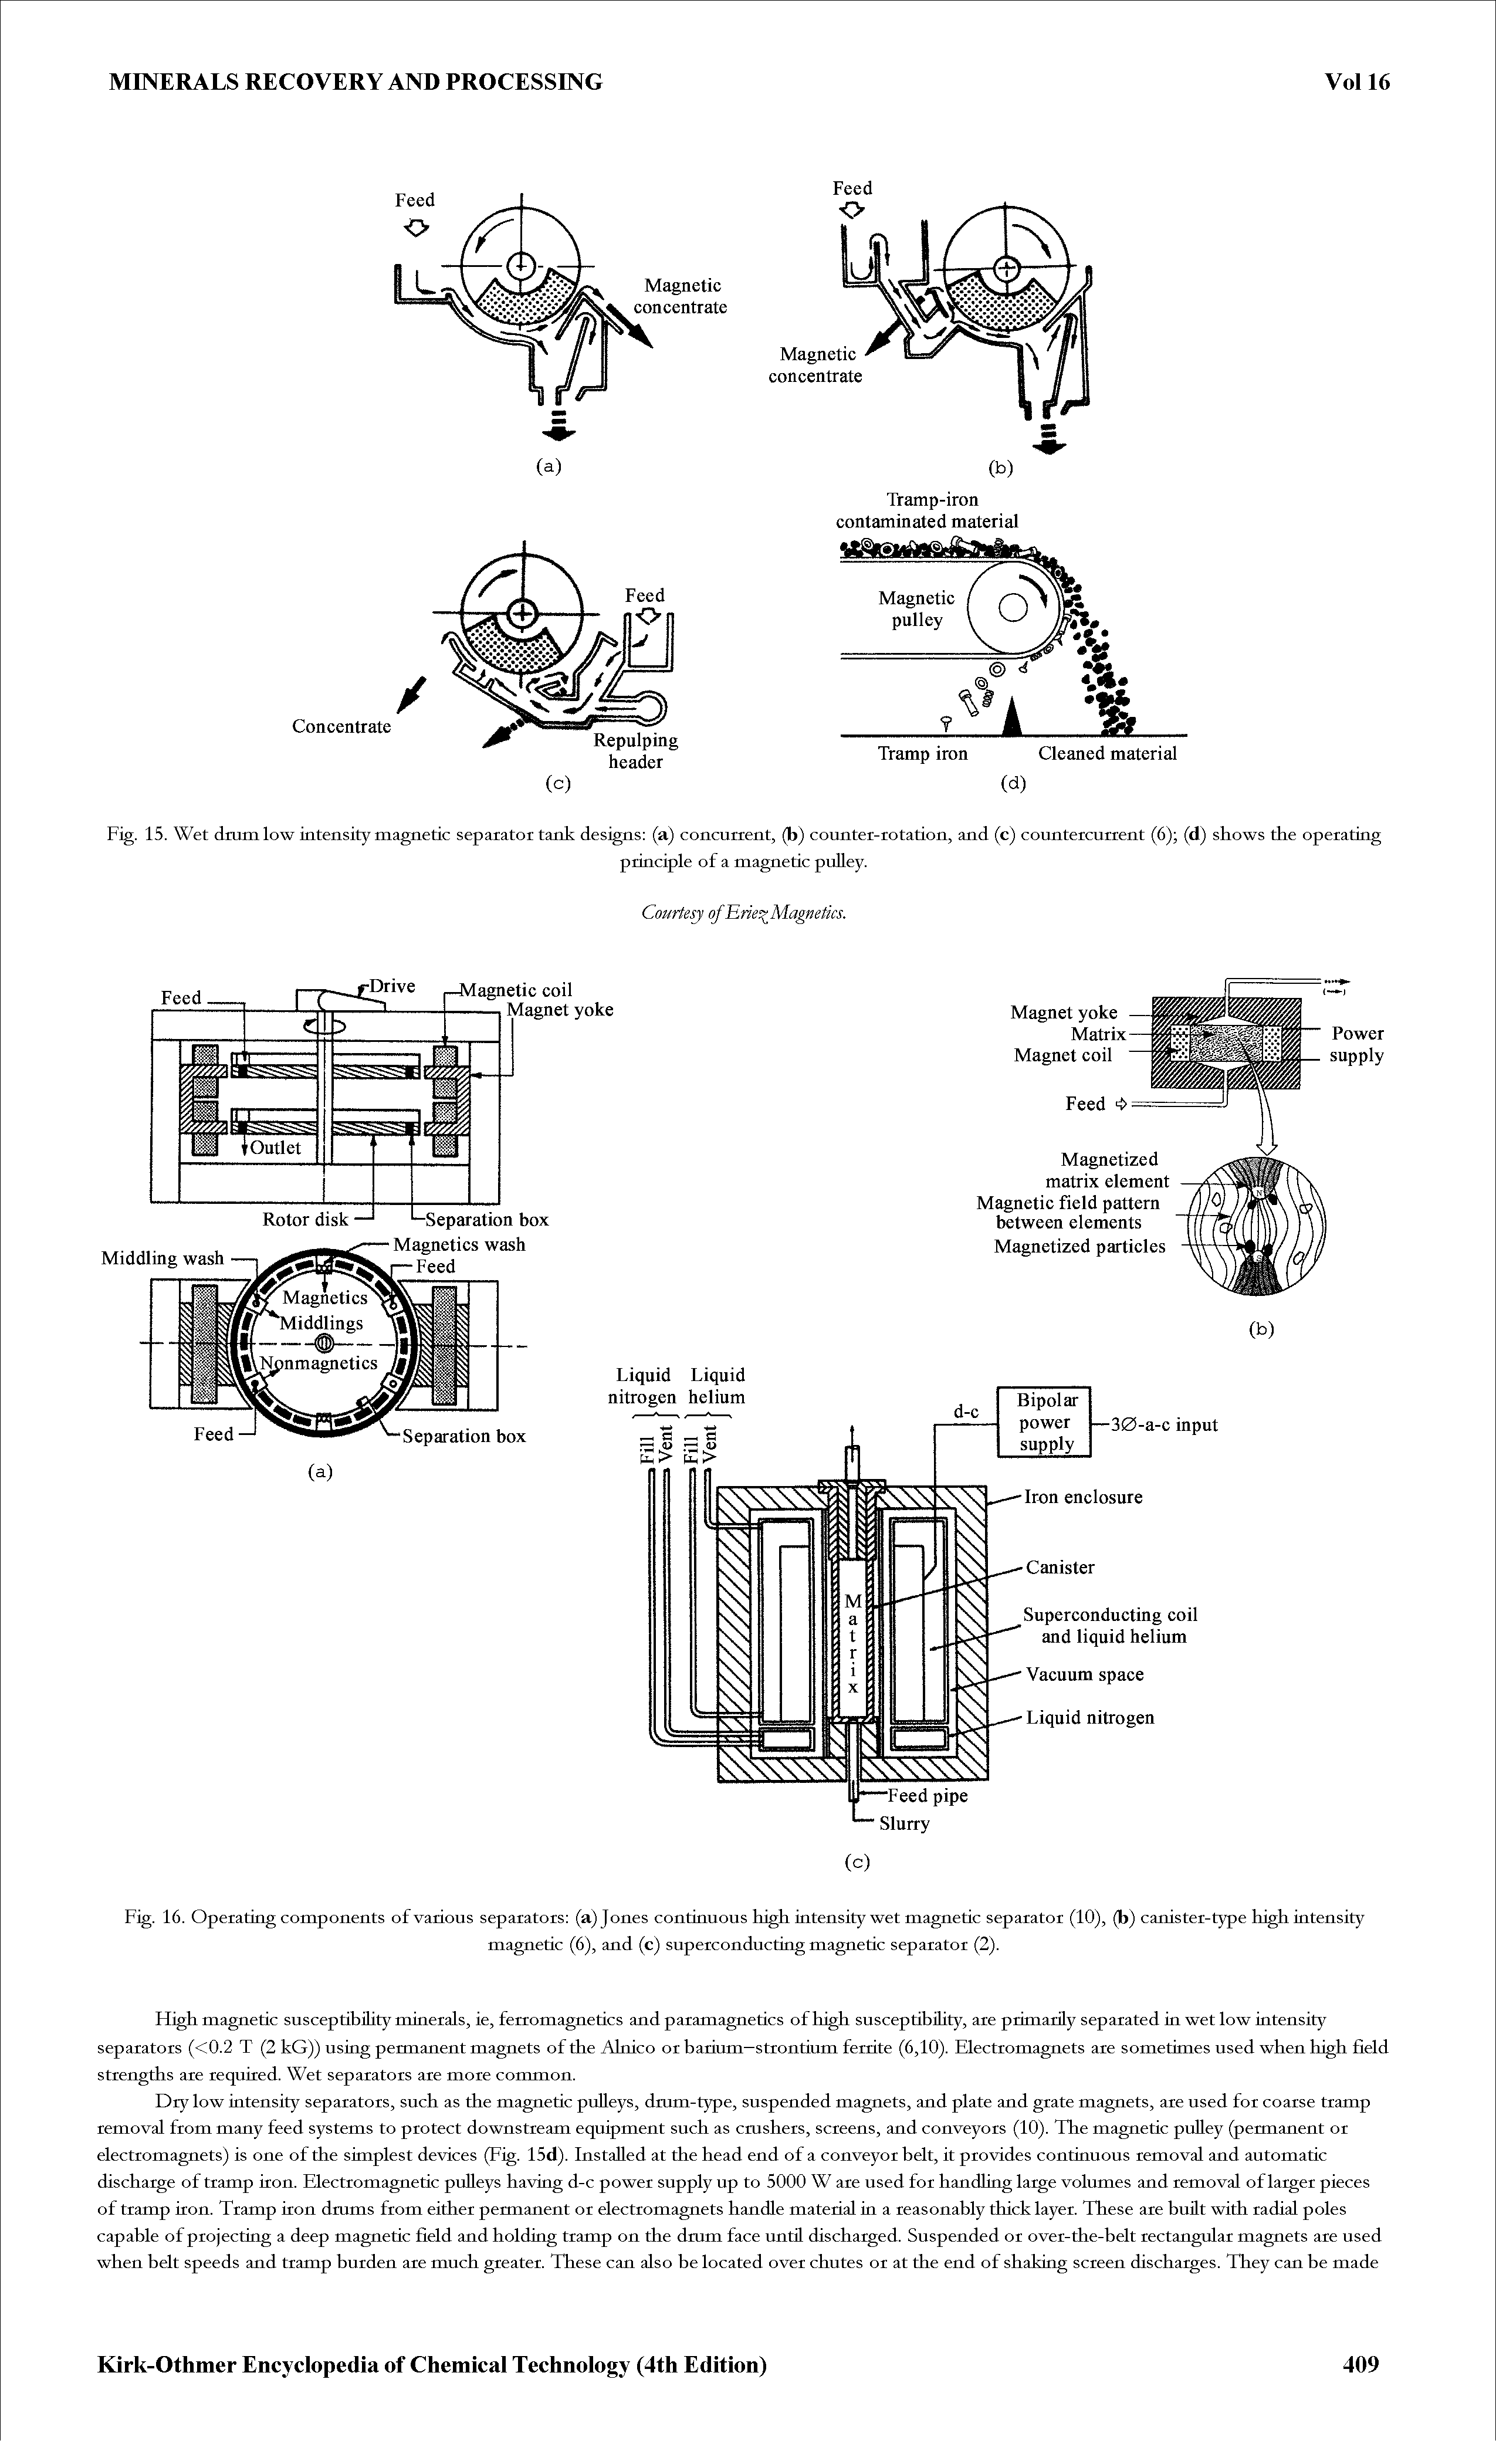 Fig. 16. Operating components of various separators (a) Jones continuous high, intensity wet magnetic separator (10), (b) canister-type high intensity...